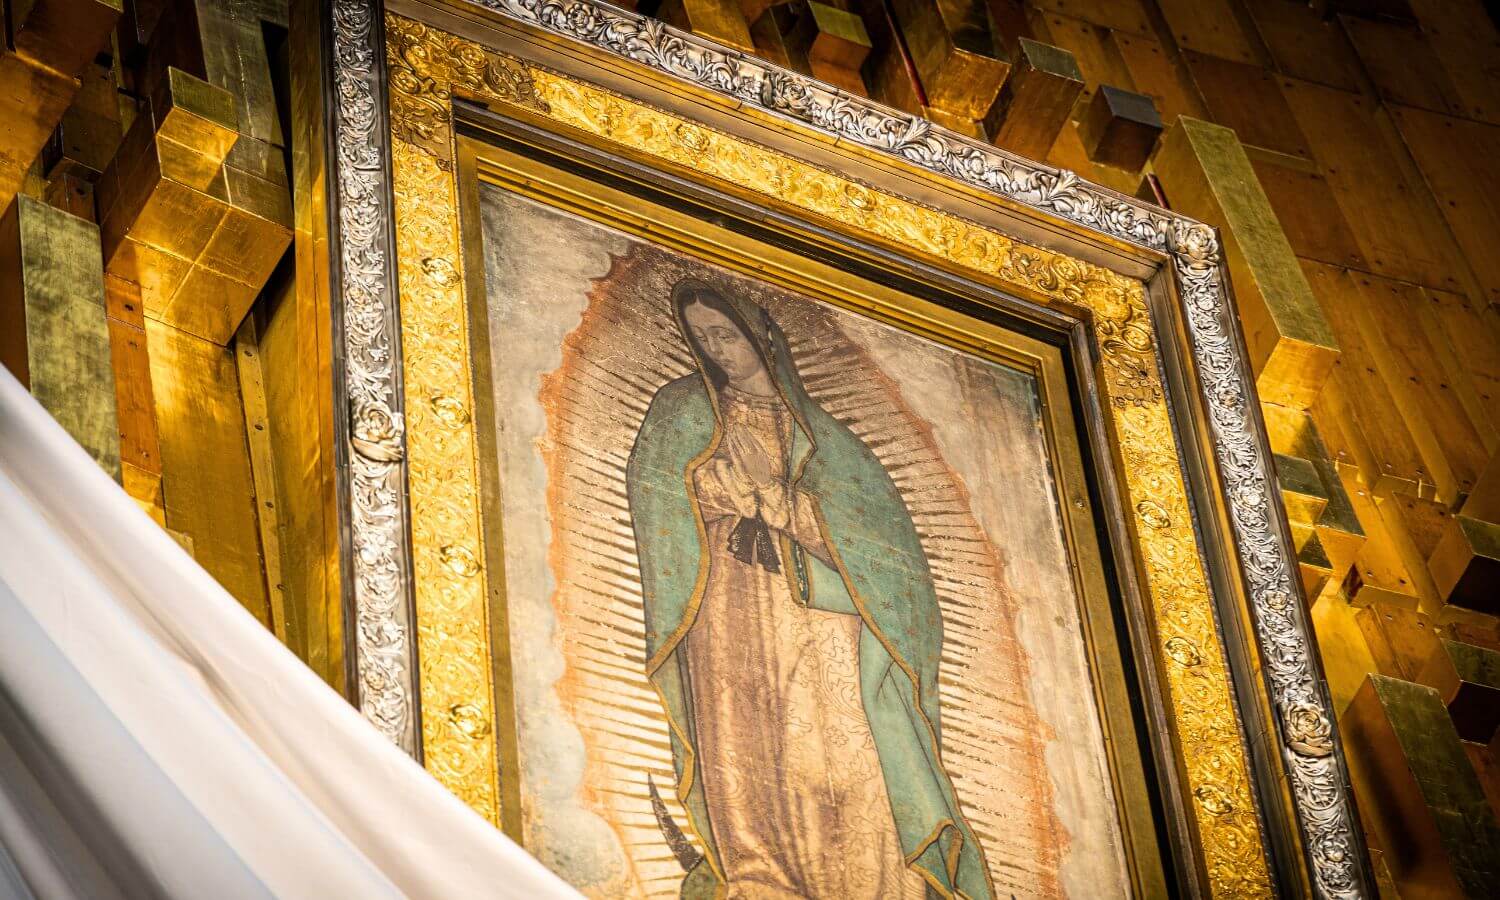 A picture of the Virgen de Guadalupe in a church.